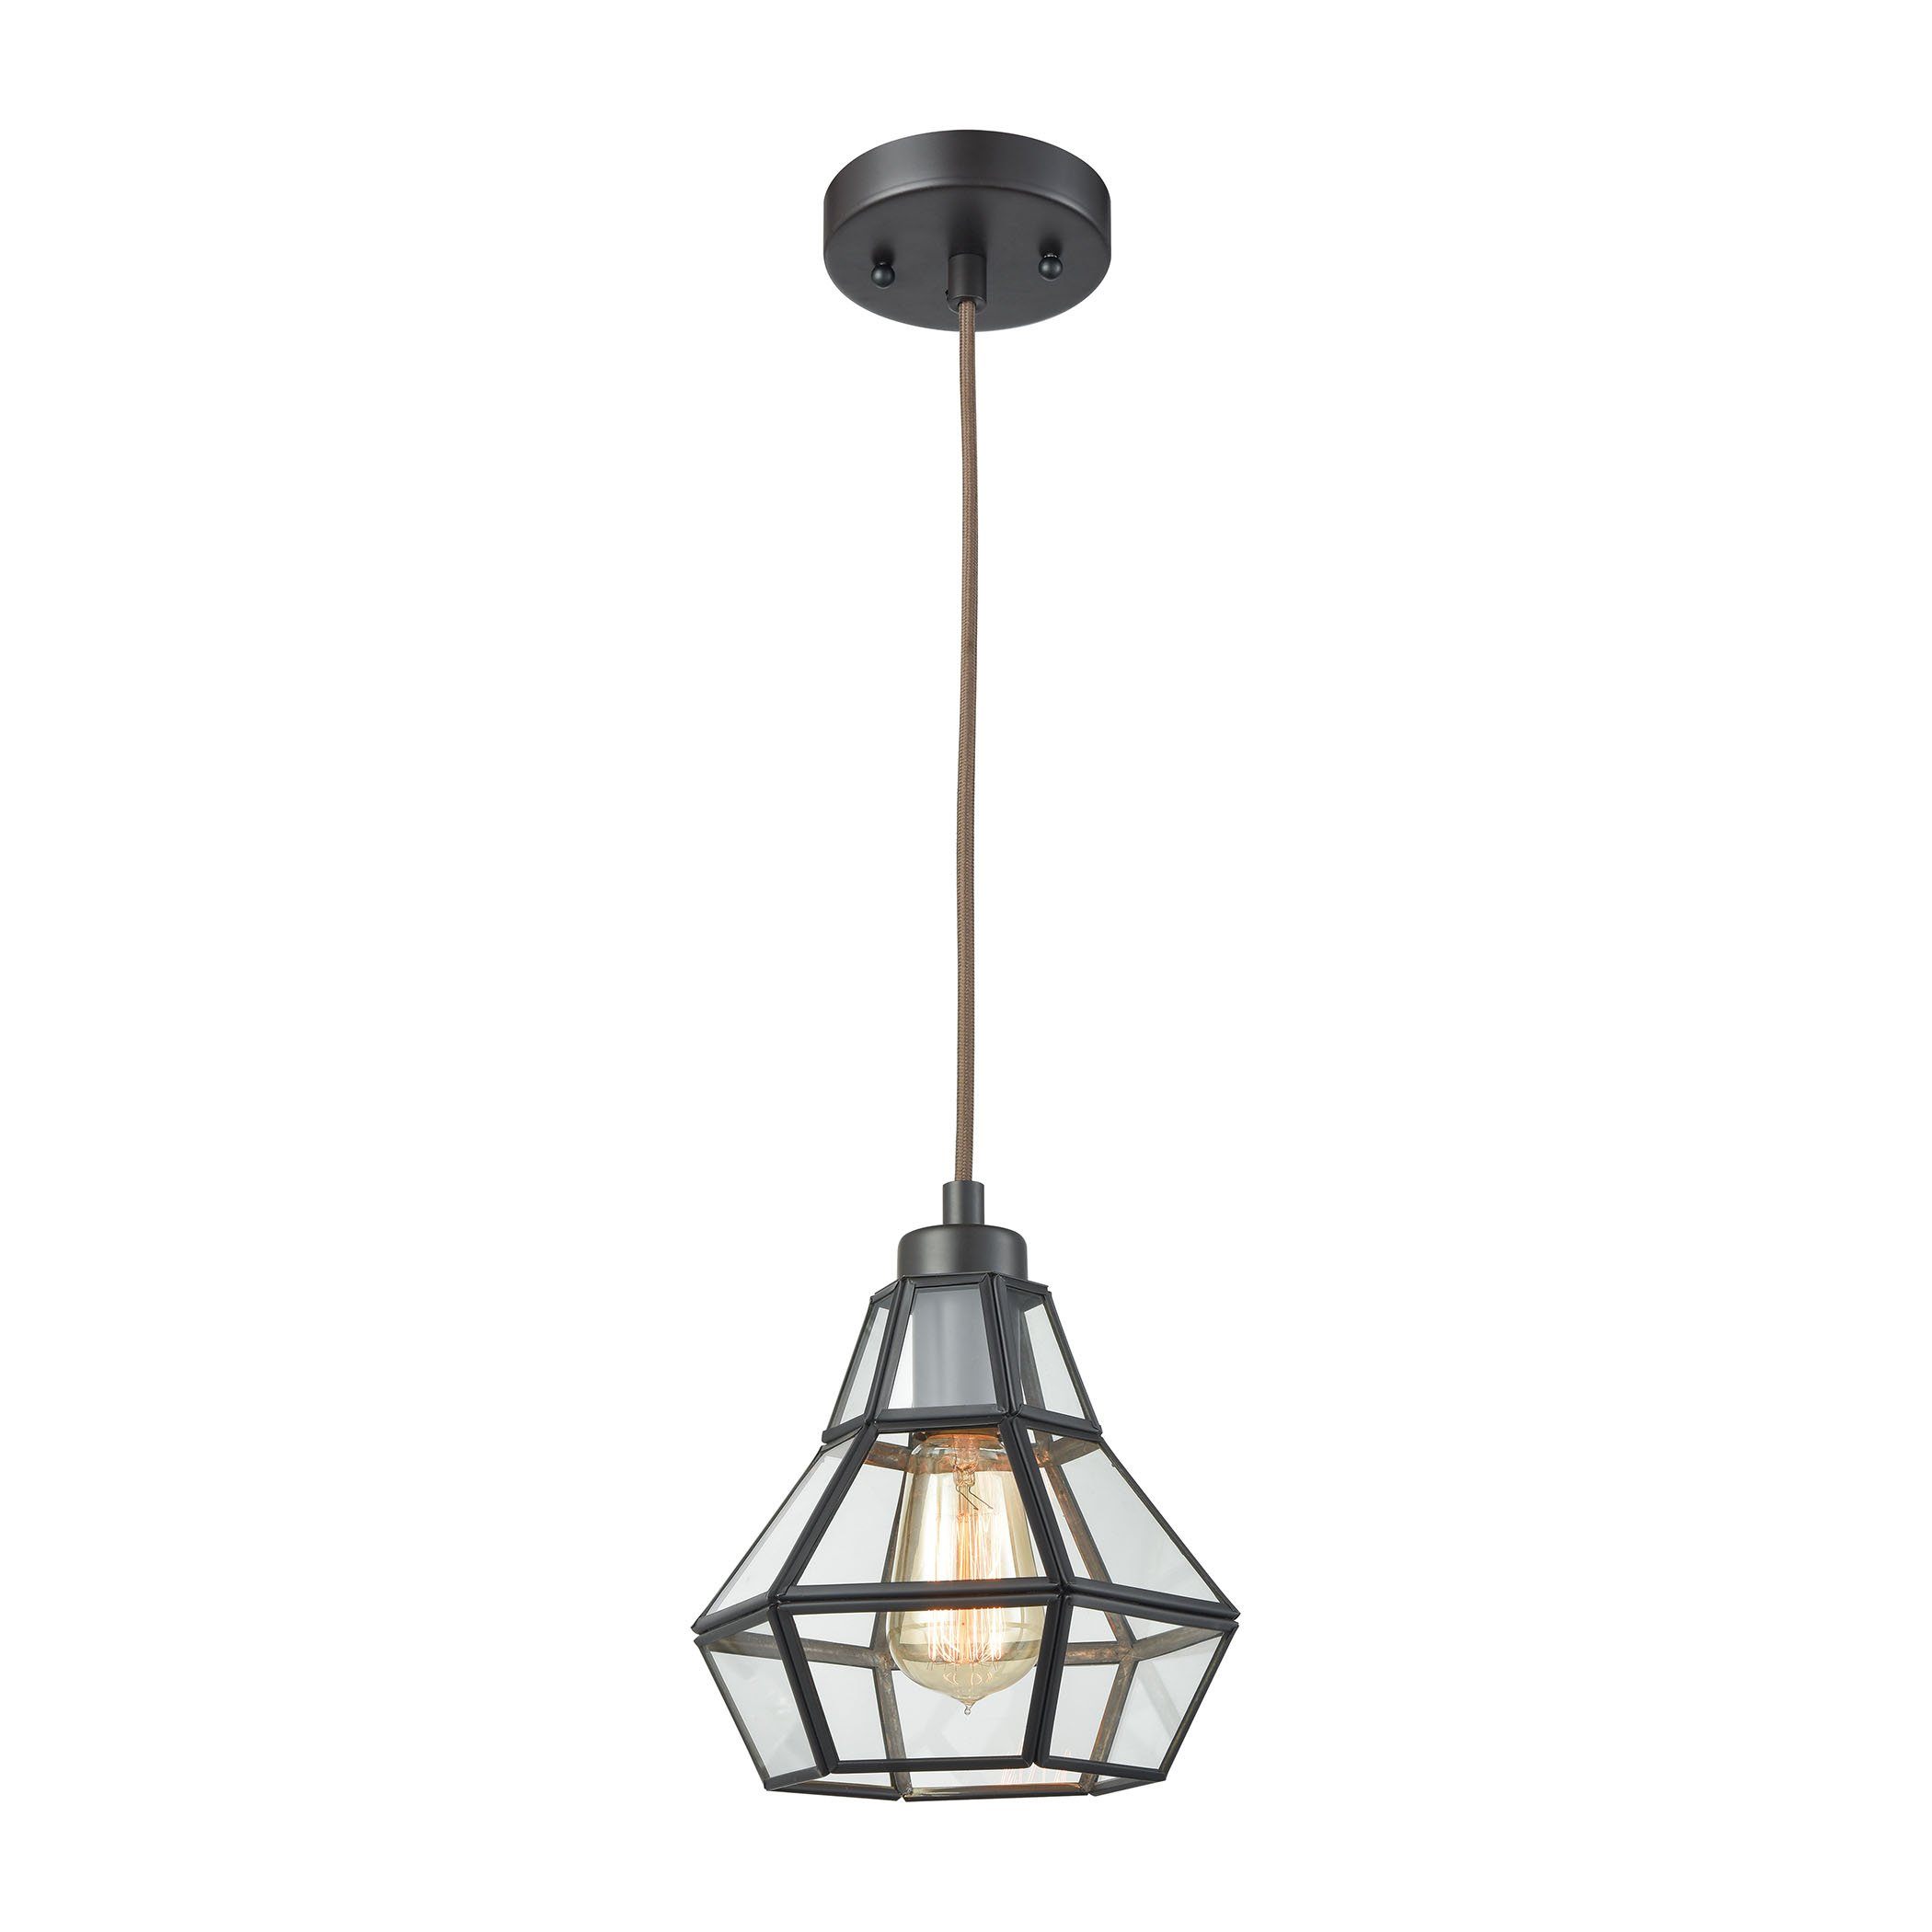 Window Pane 1 Light Pendant in Oil Rubbed Bronze with Clear Glass Ceiling Elk Lighting 